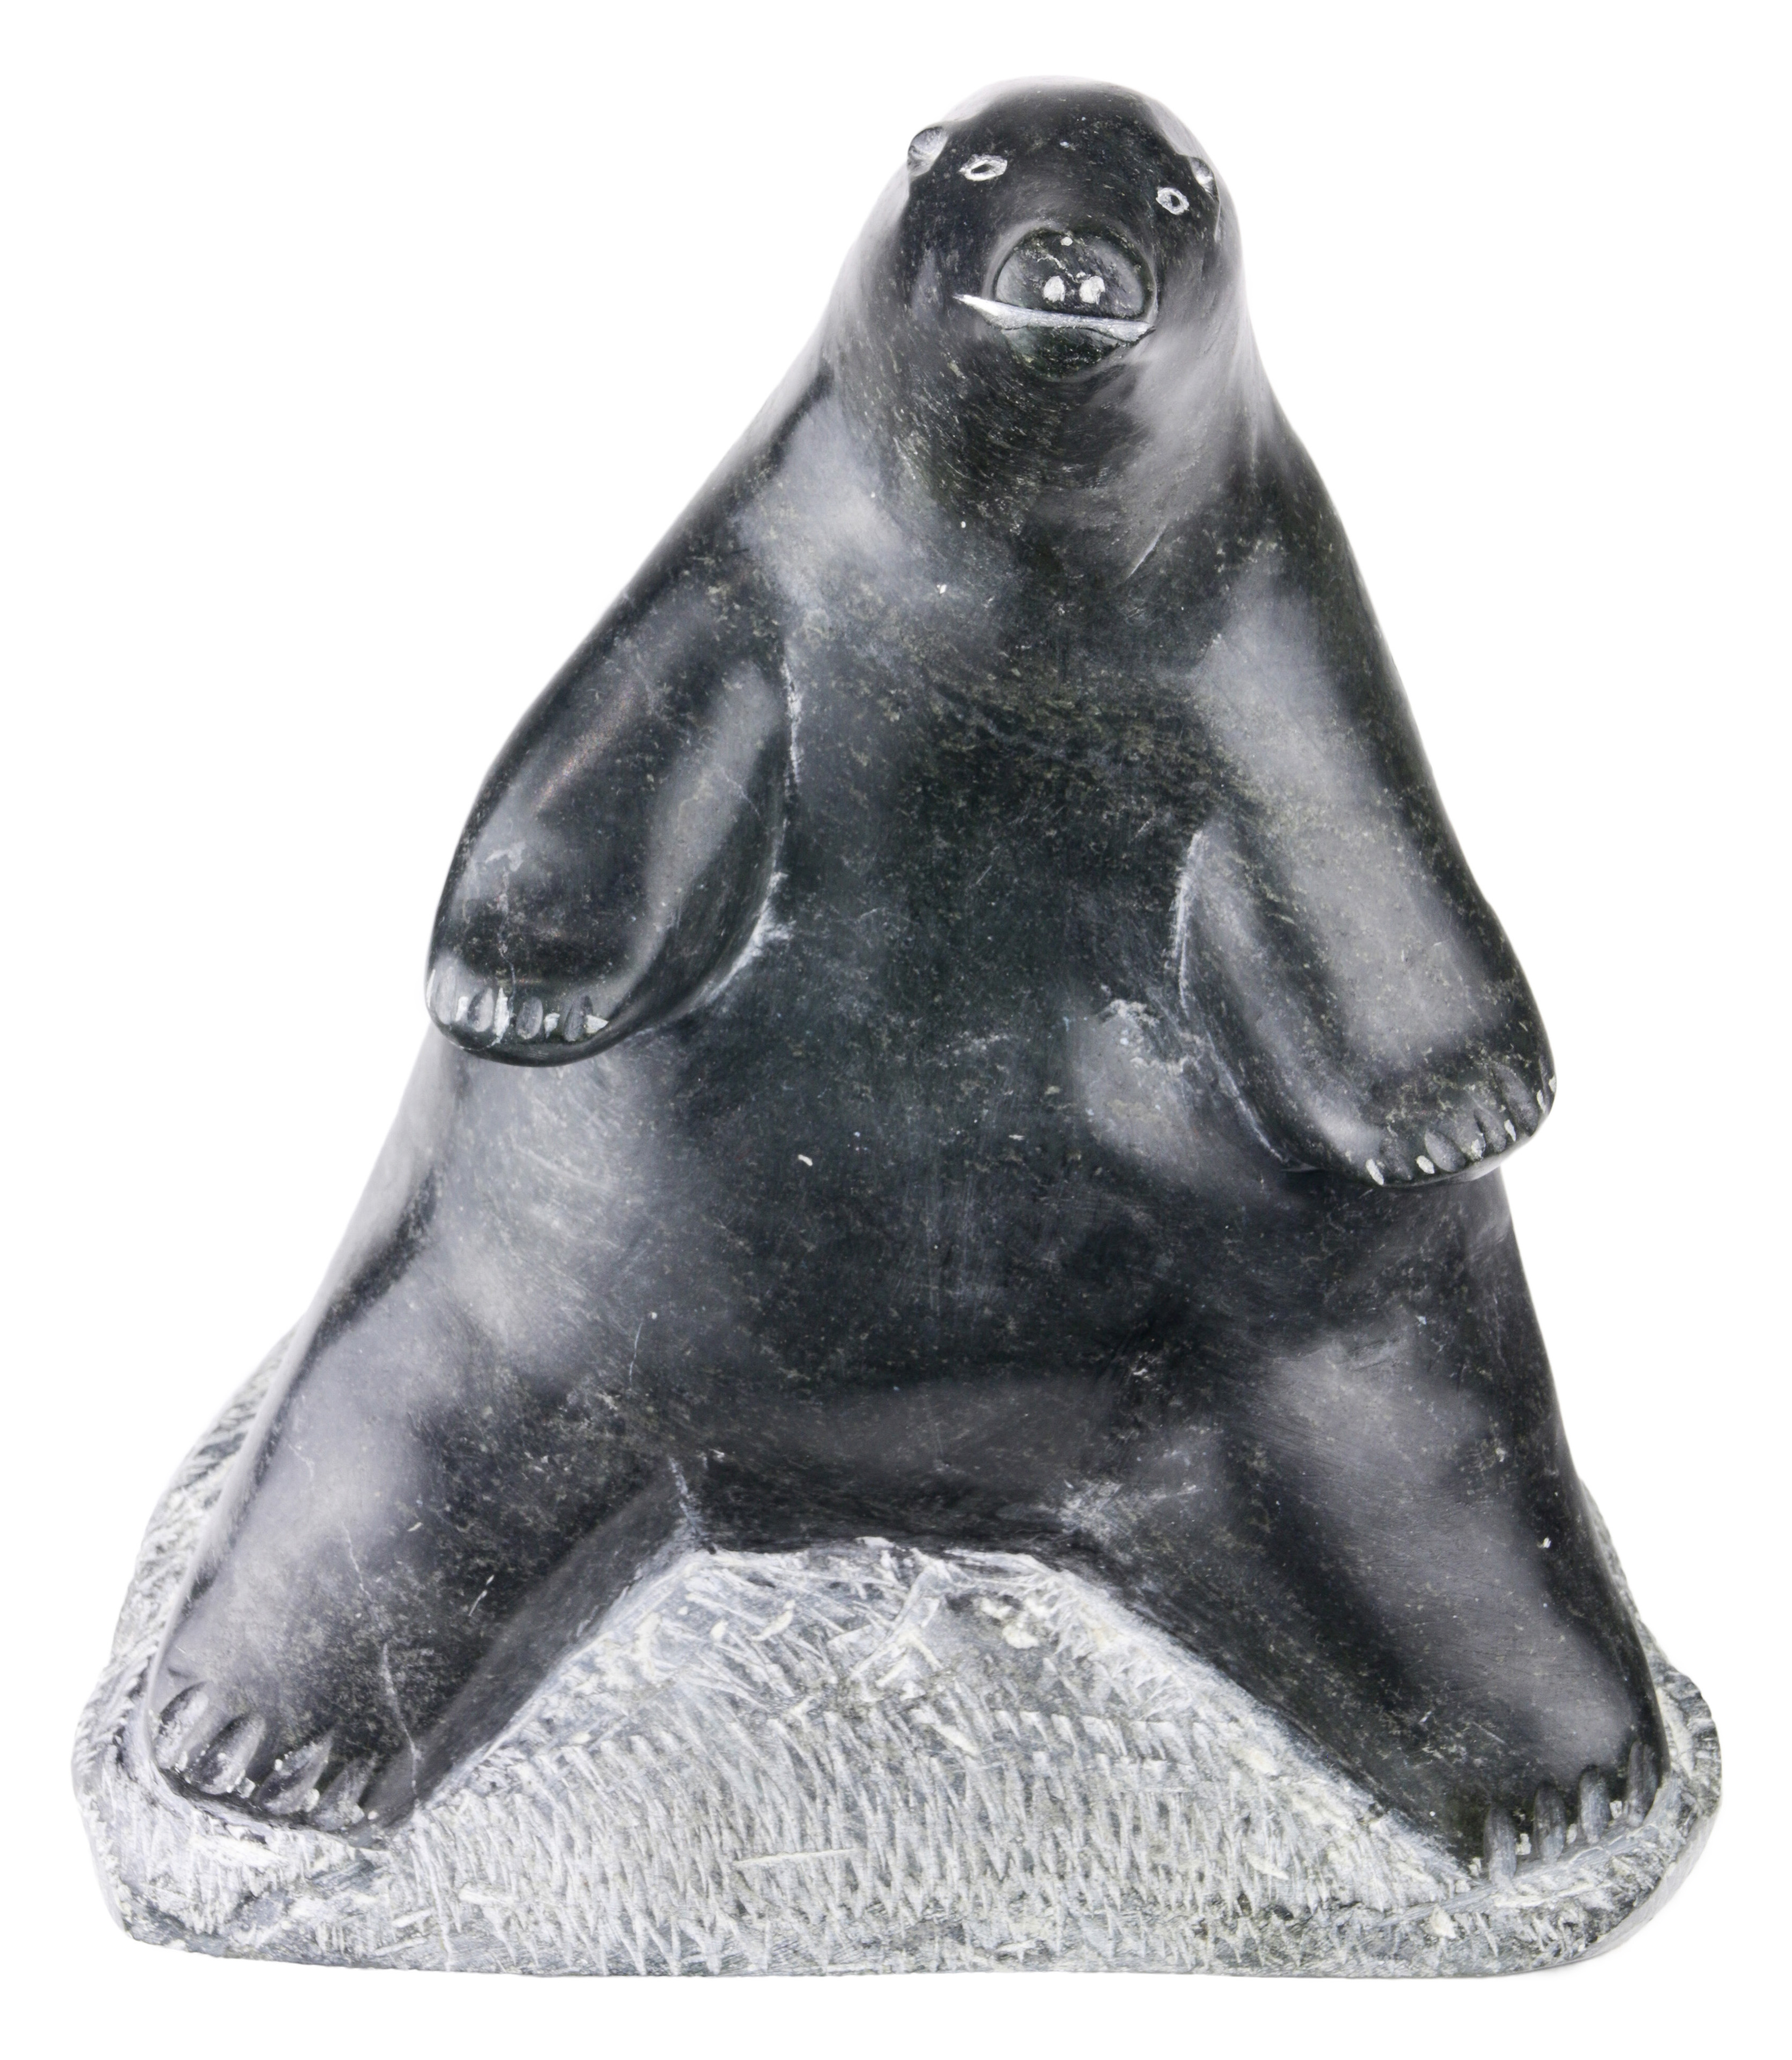 AN INUIT FIGURAL SCULPTURE ATTRIBUTED